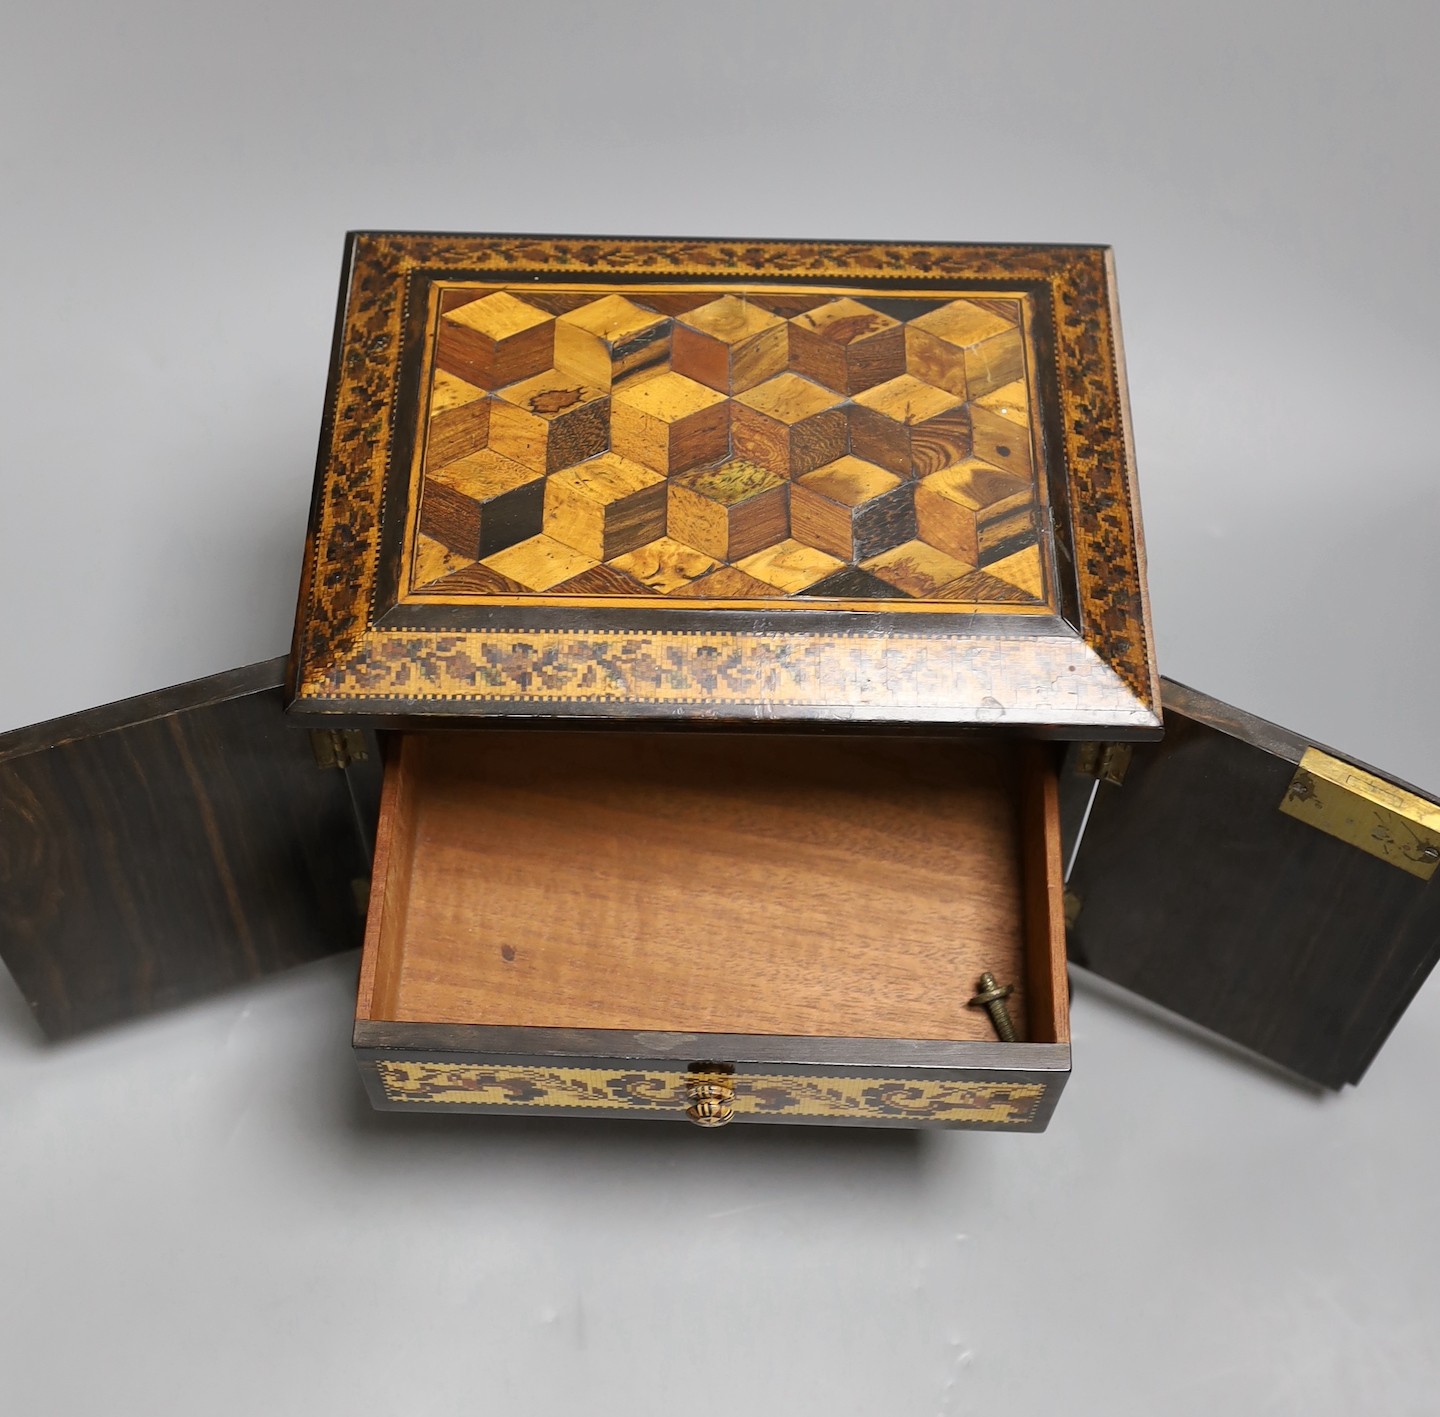 A 19th century Tunbridge ware specimen cube marquetry and coromandel table cabinet, label to underside reads ‘T.Barton, Late NYE, Manufacturer, Mount Ephraim and Parade, Tunbridge Wells’, 18cm tall